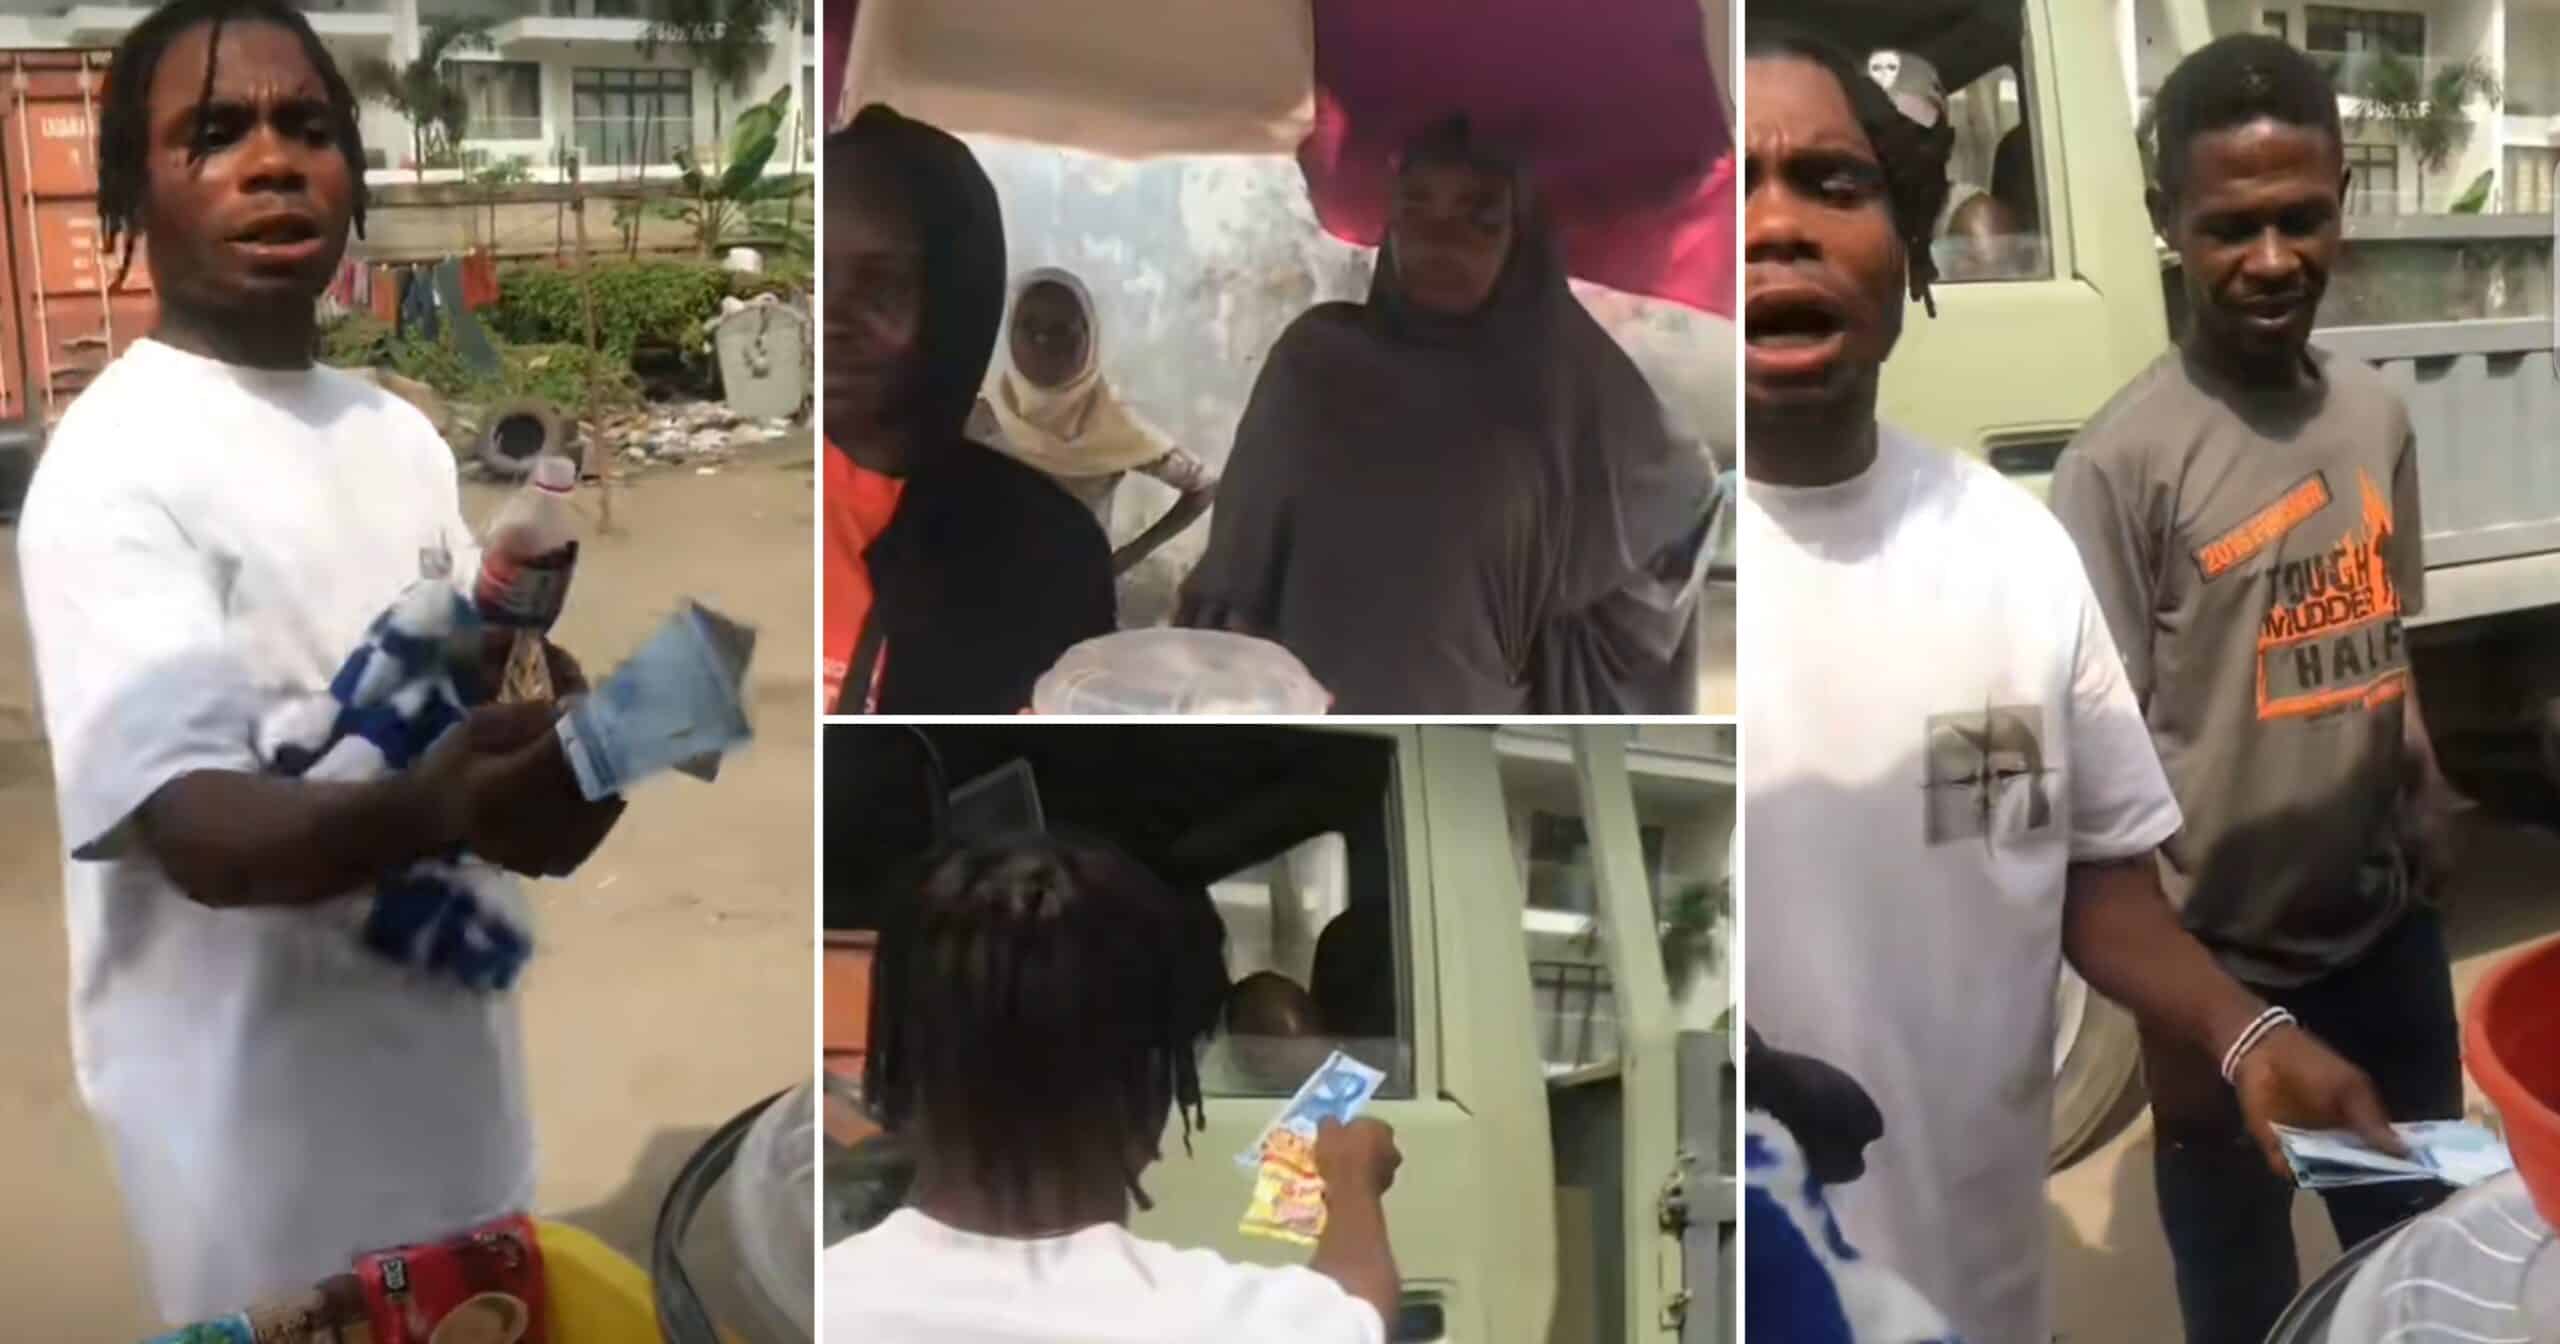 "Na yahoo money?" - Market woman rejects new N1k note (Video)